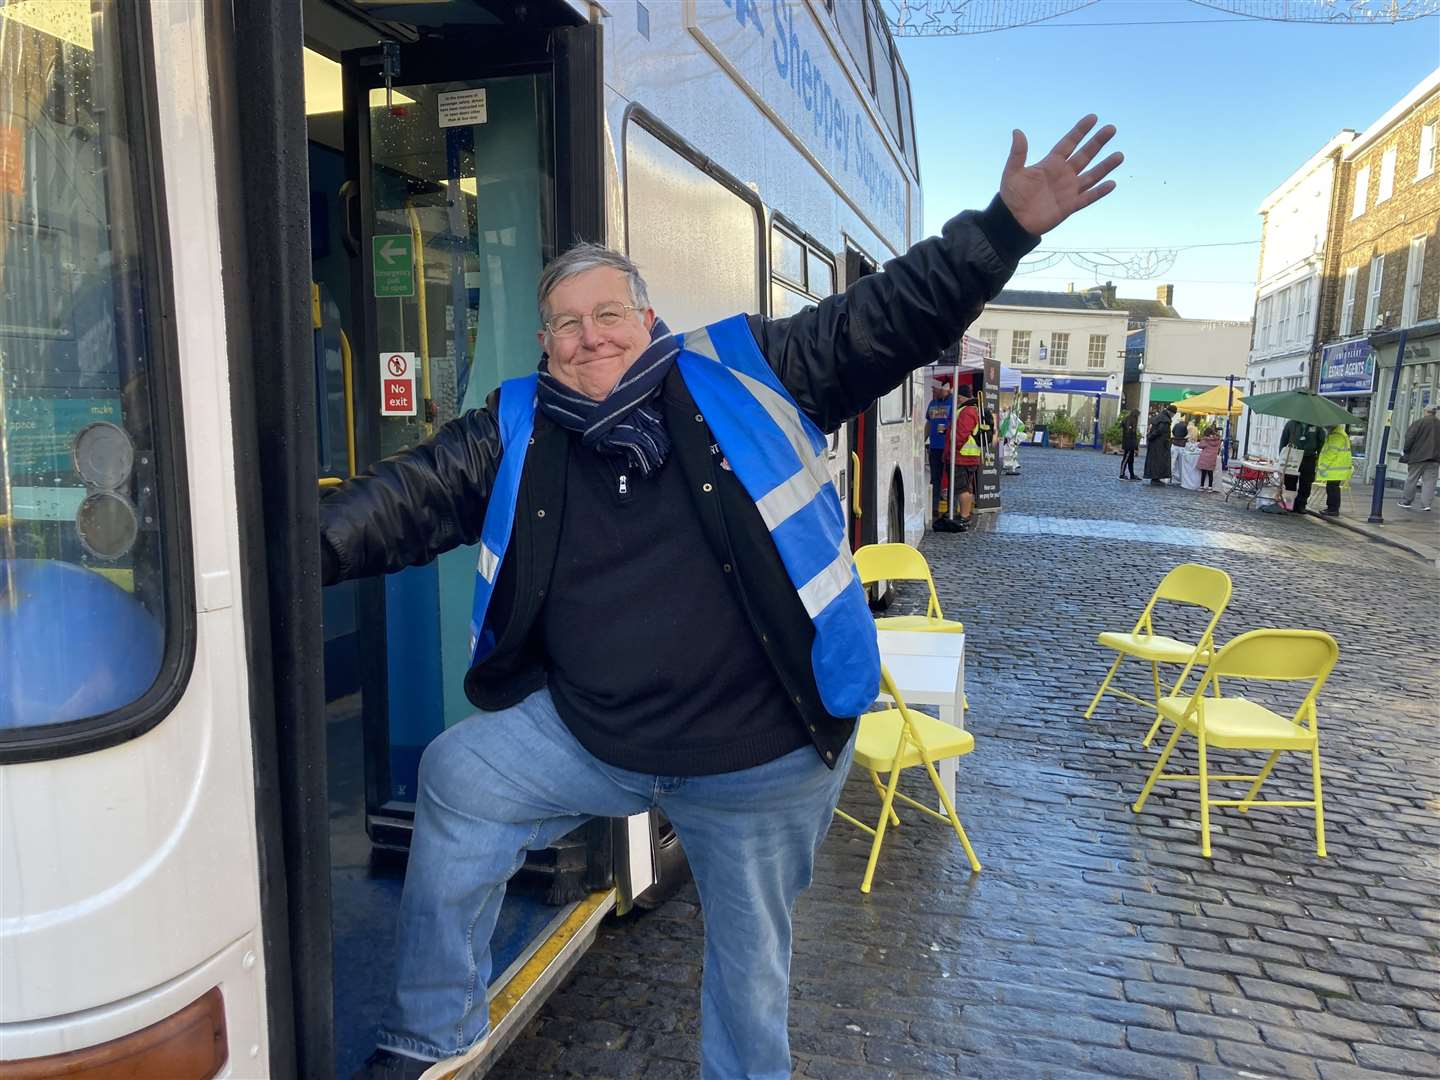 Mike Riley took along the Sheppey Community Support Bus and parked it in the Broadway